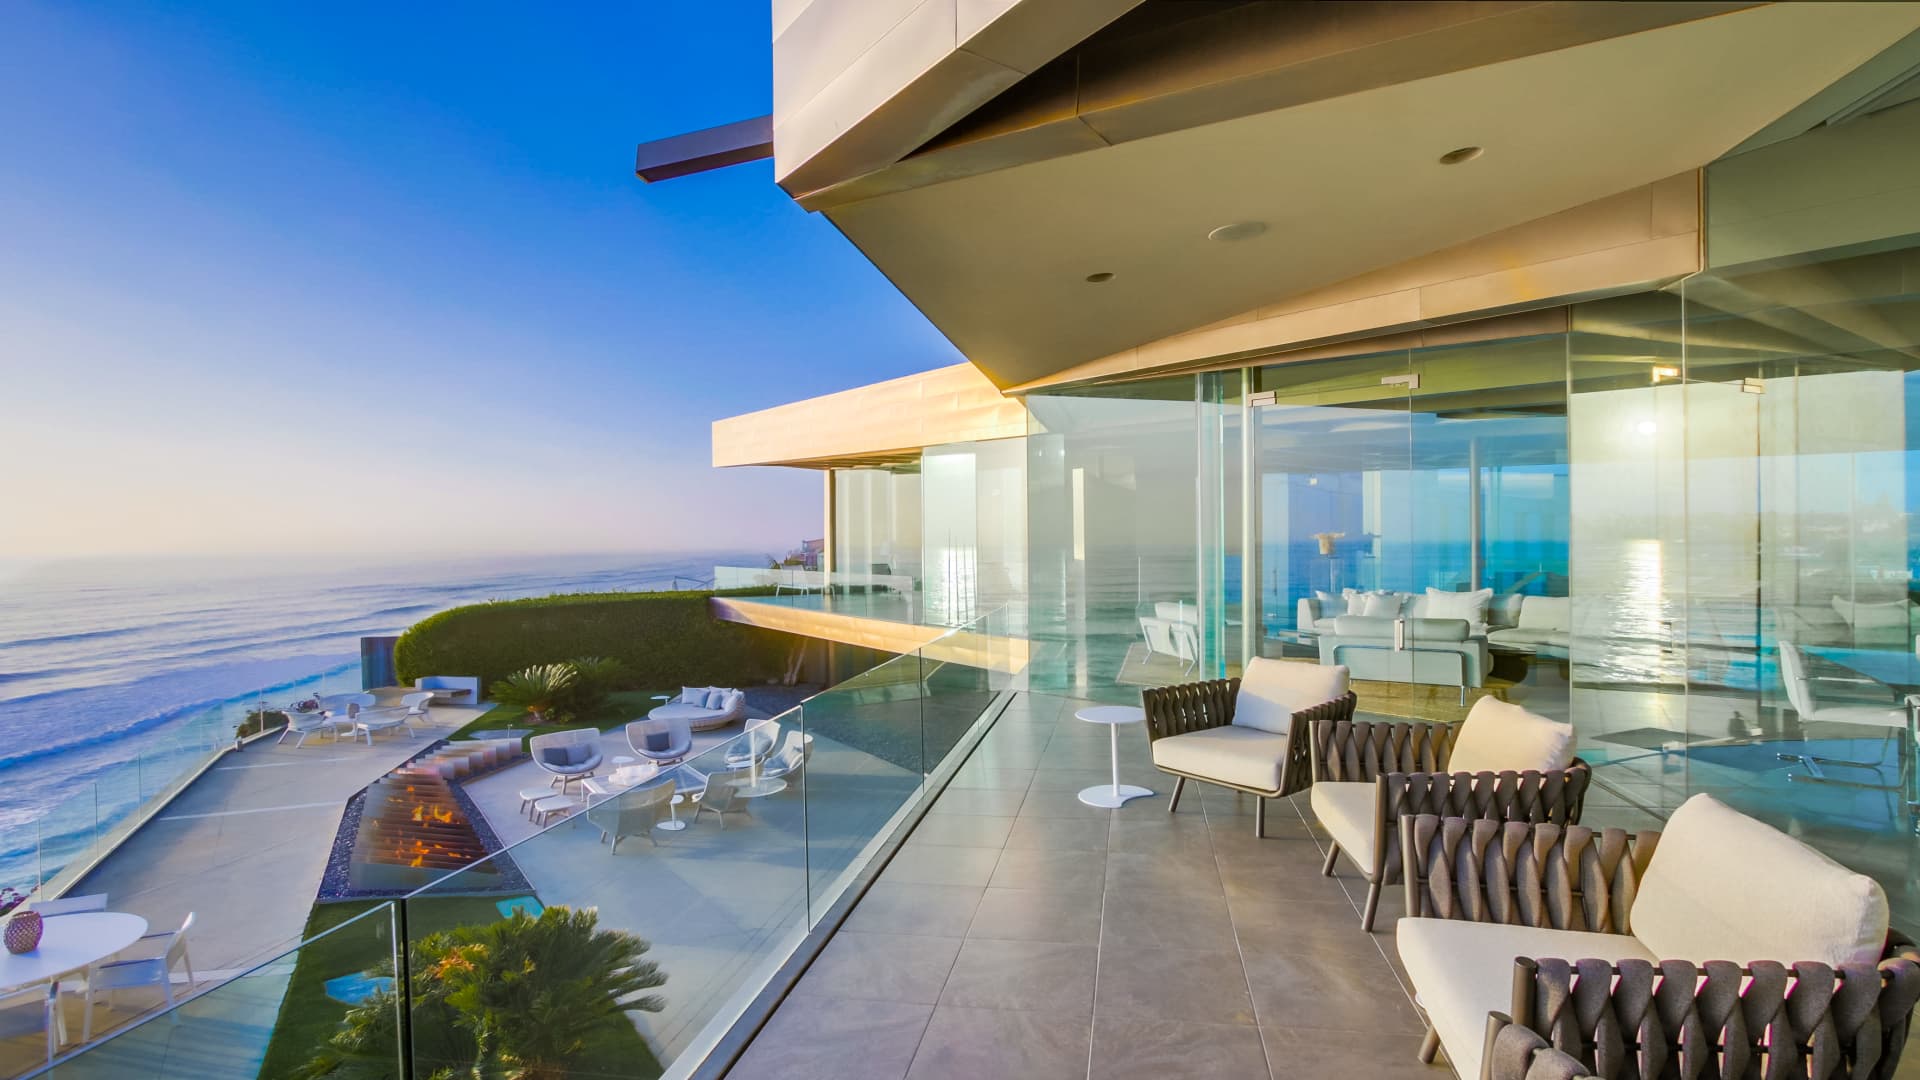 Inside the $ 23.5 million house that could break local California records